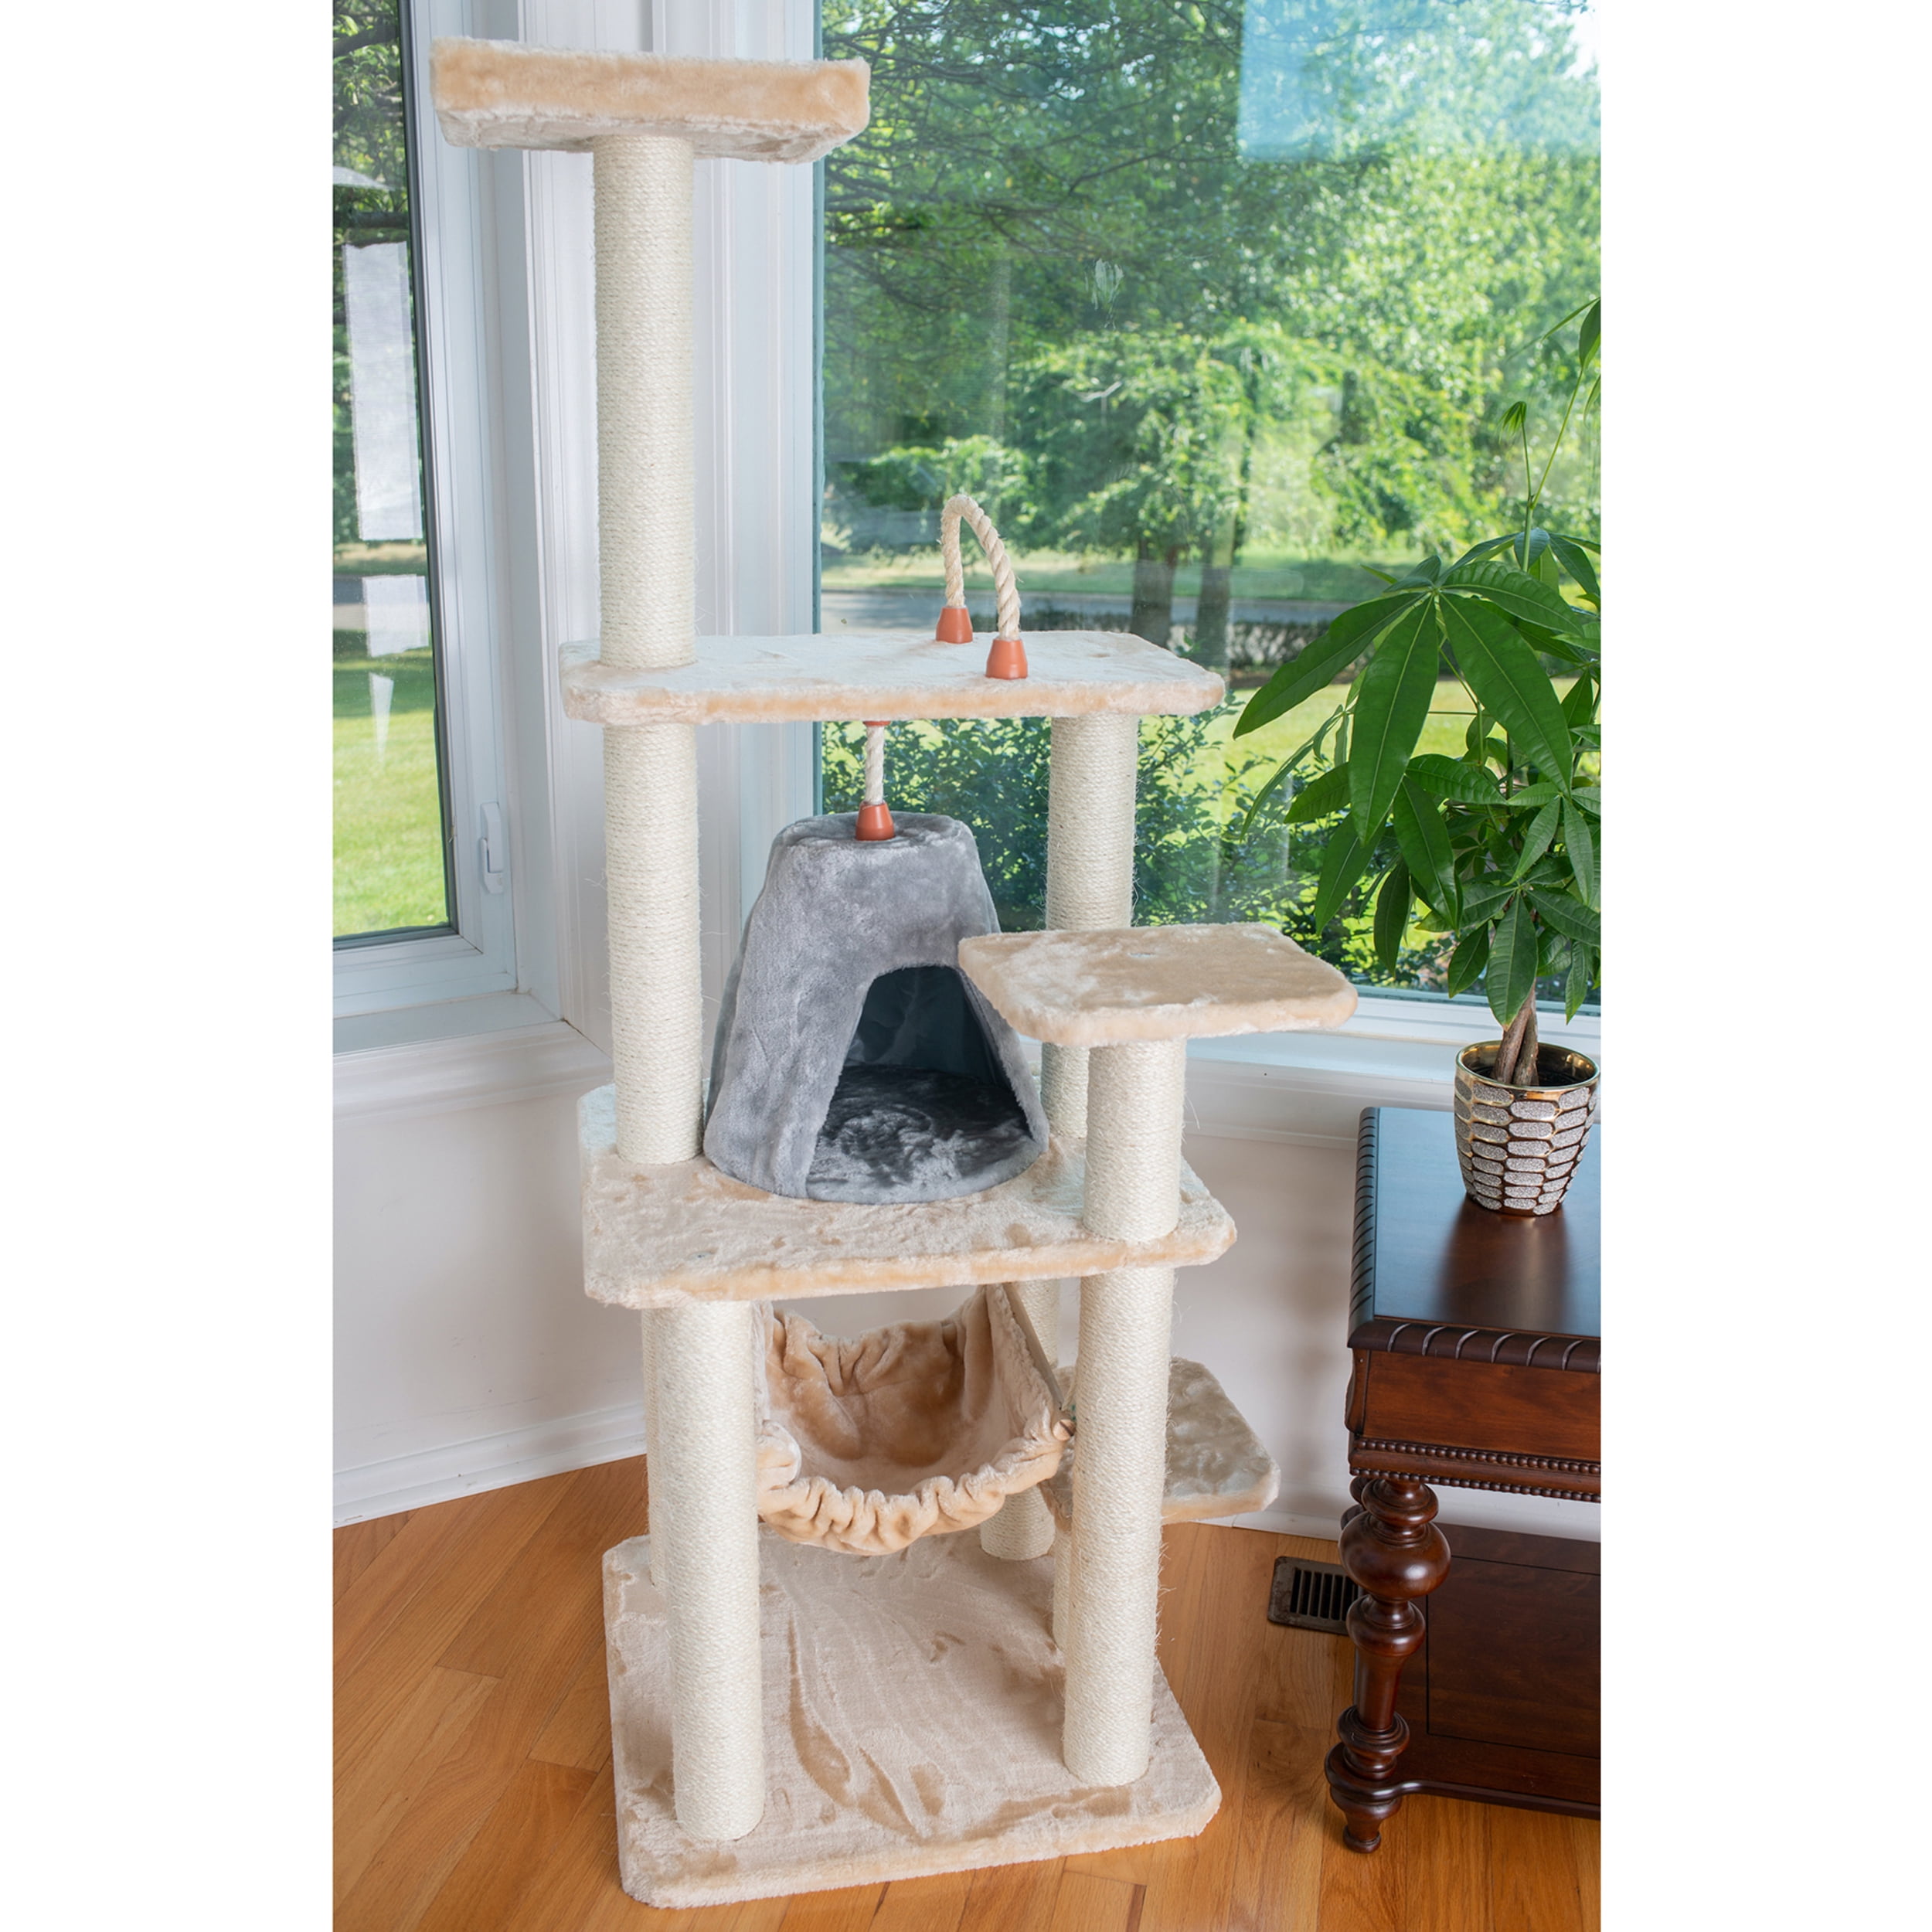 73" Cat Tree Condo Furniture Scratch Post Pet House Beige/Gray Paws/Apricot 